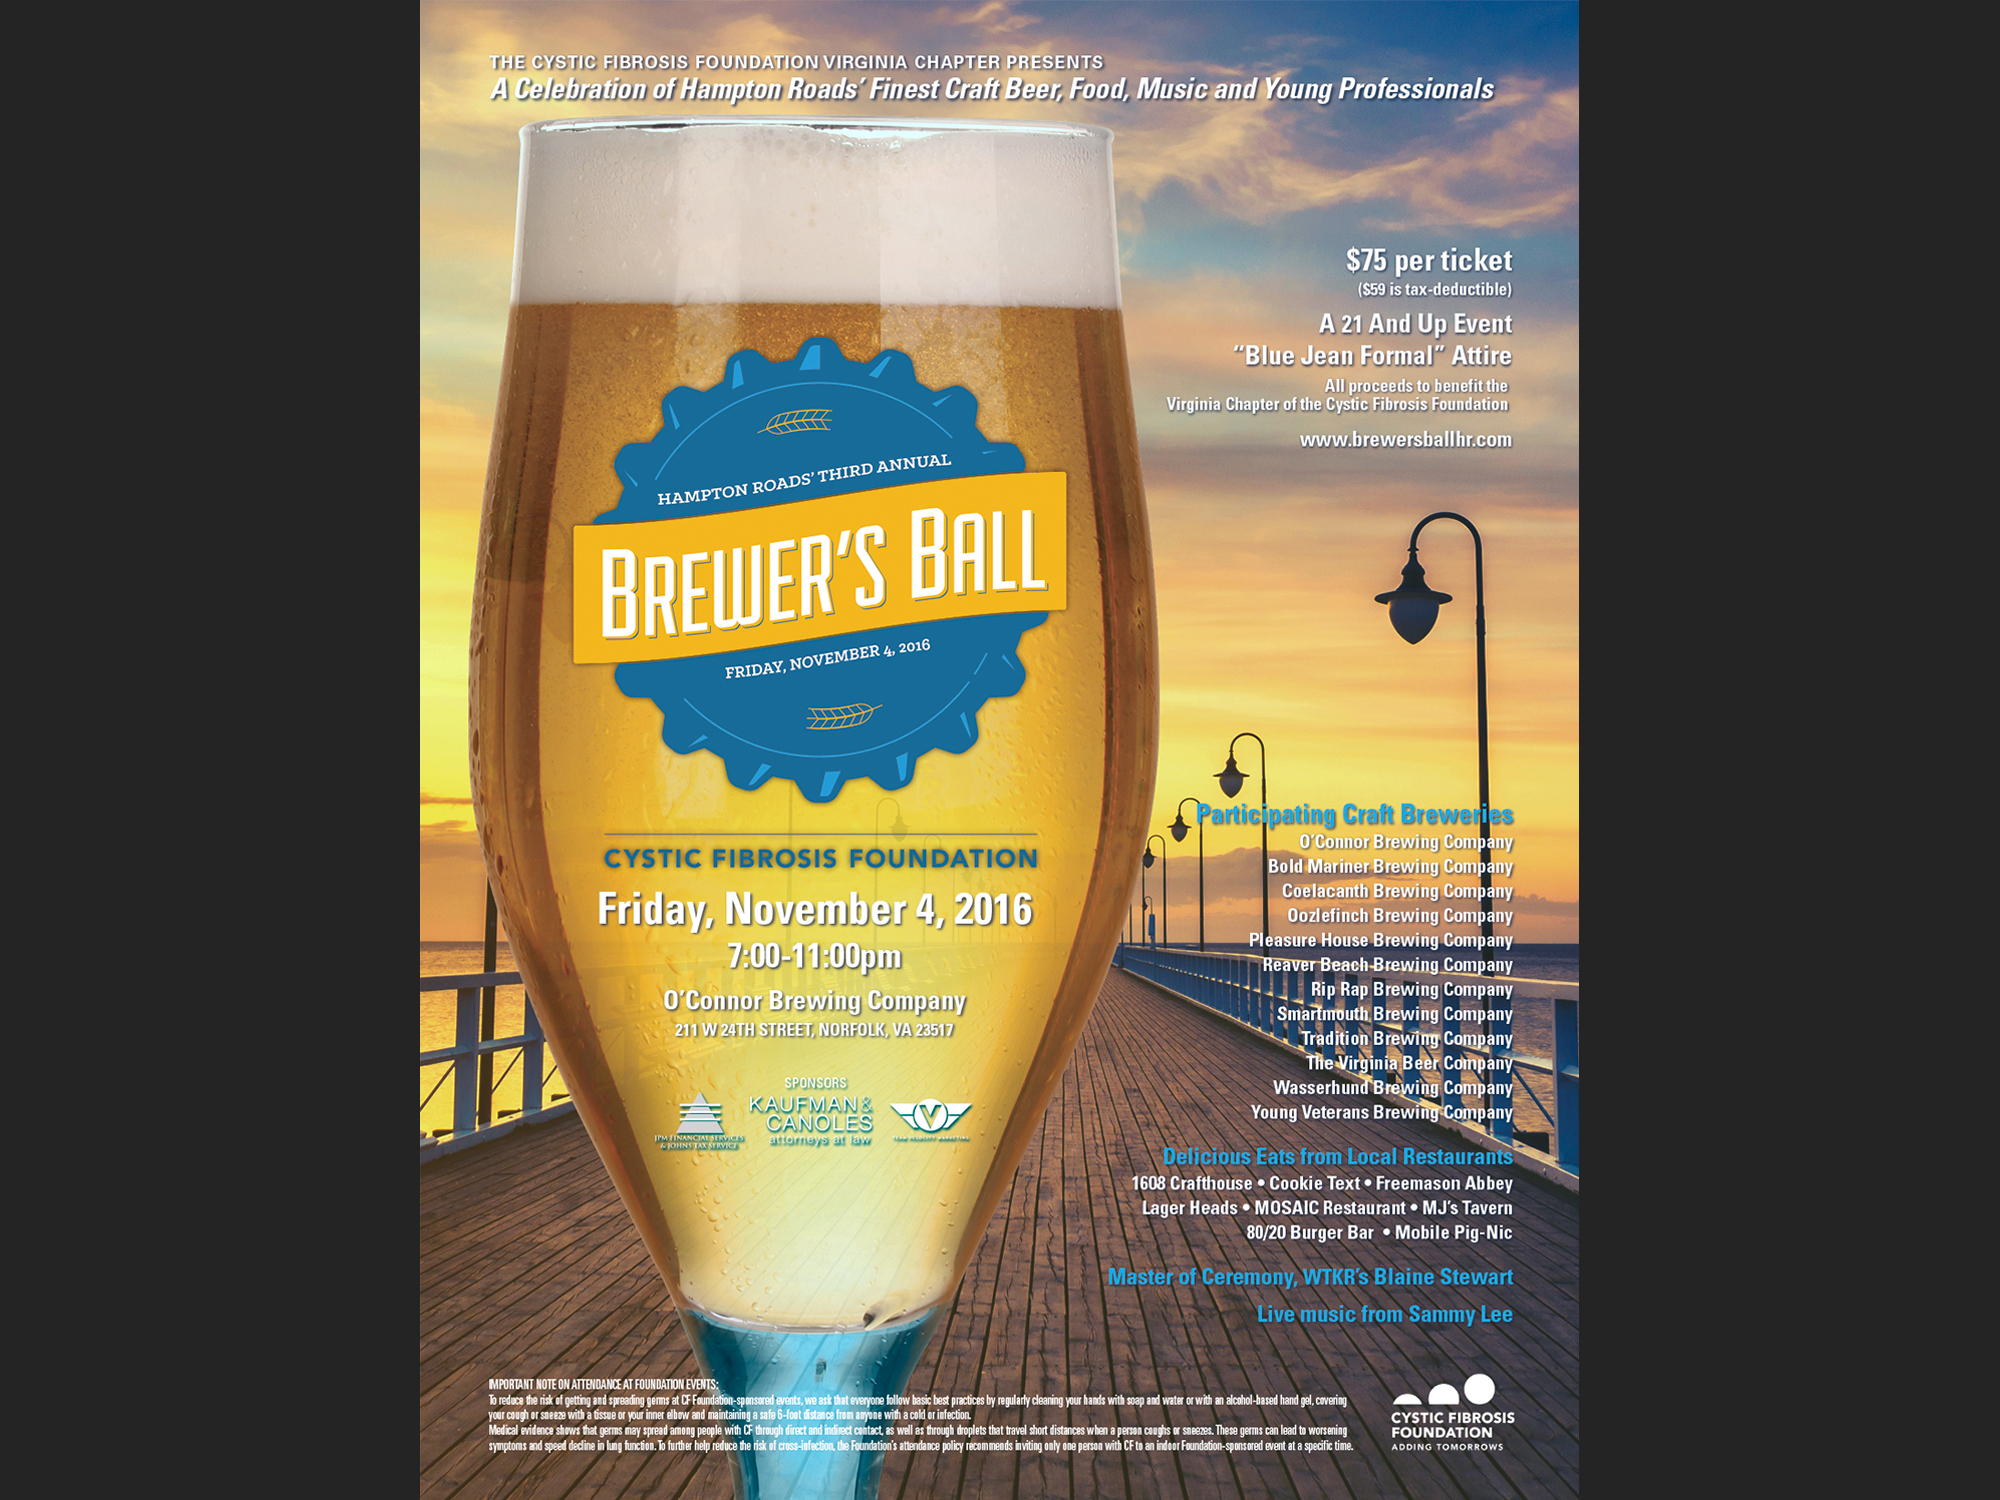 Brewer's Ball - Cystic Fibrosis Foundation, 2016; poster/flyer.